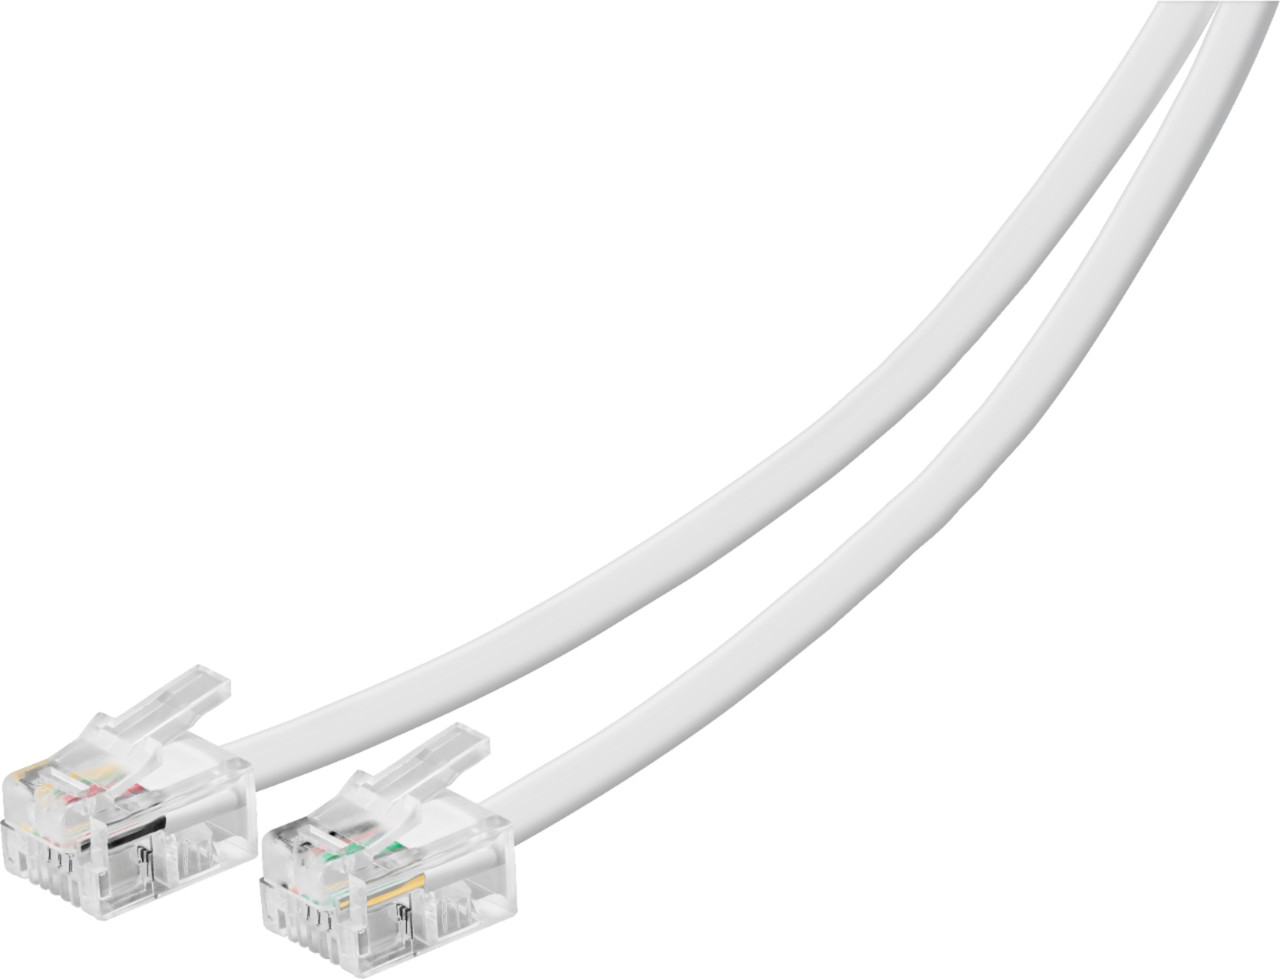 Insignia™ - 100' Ethernet Cable - White